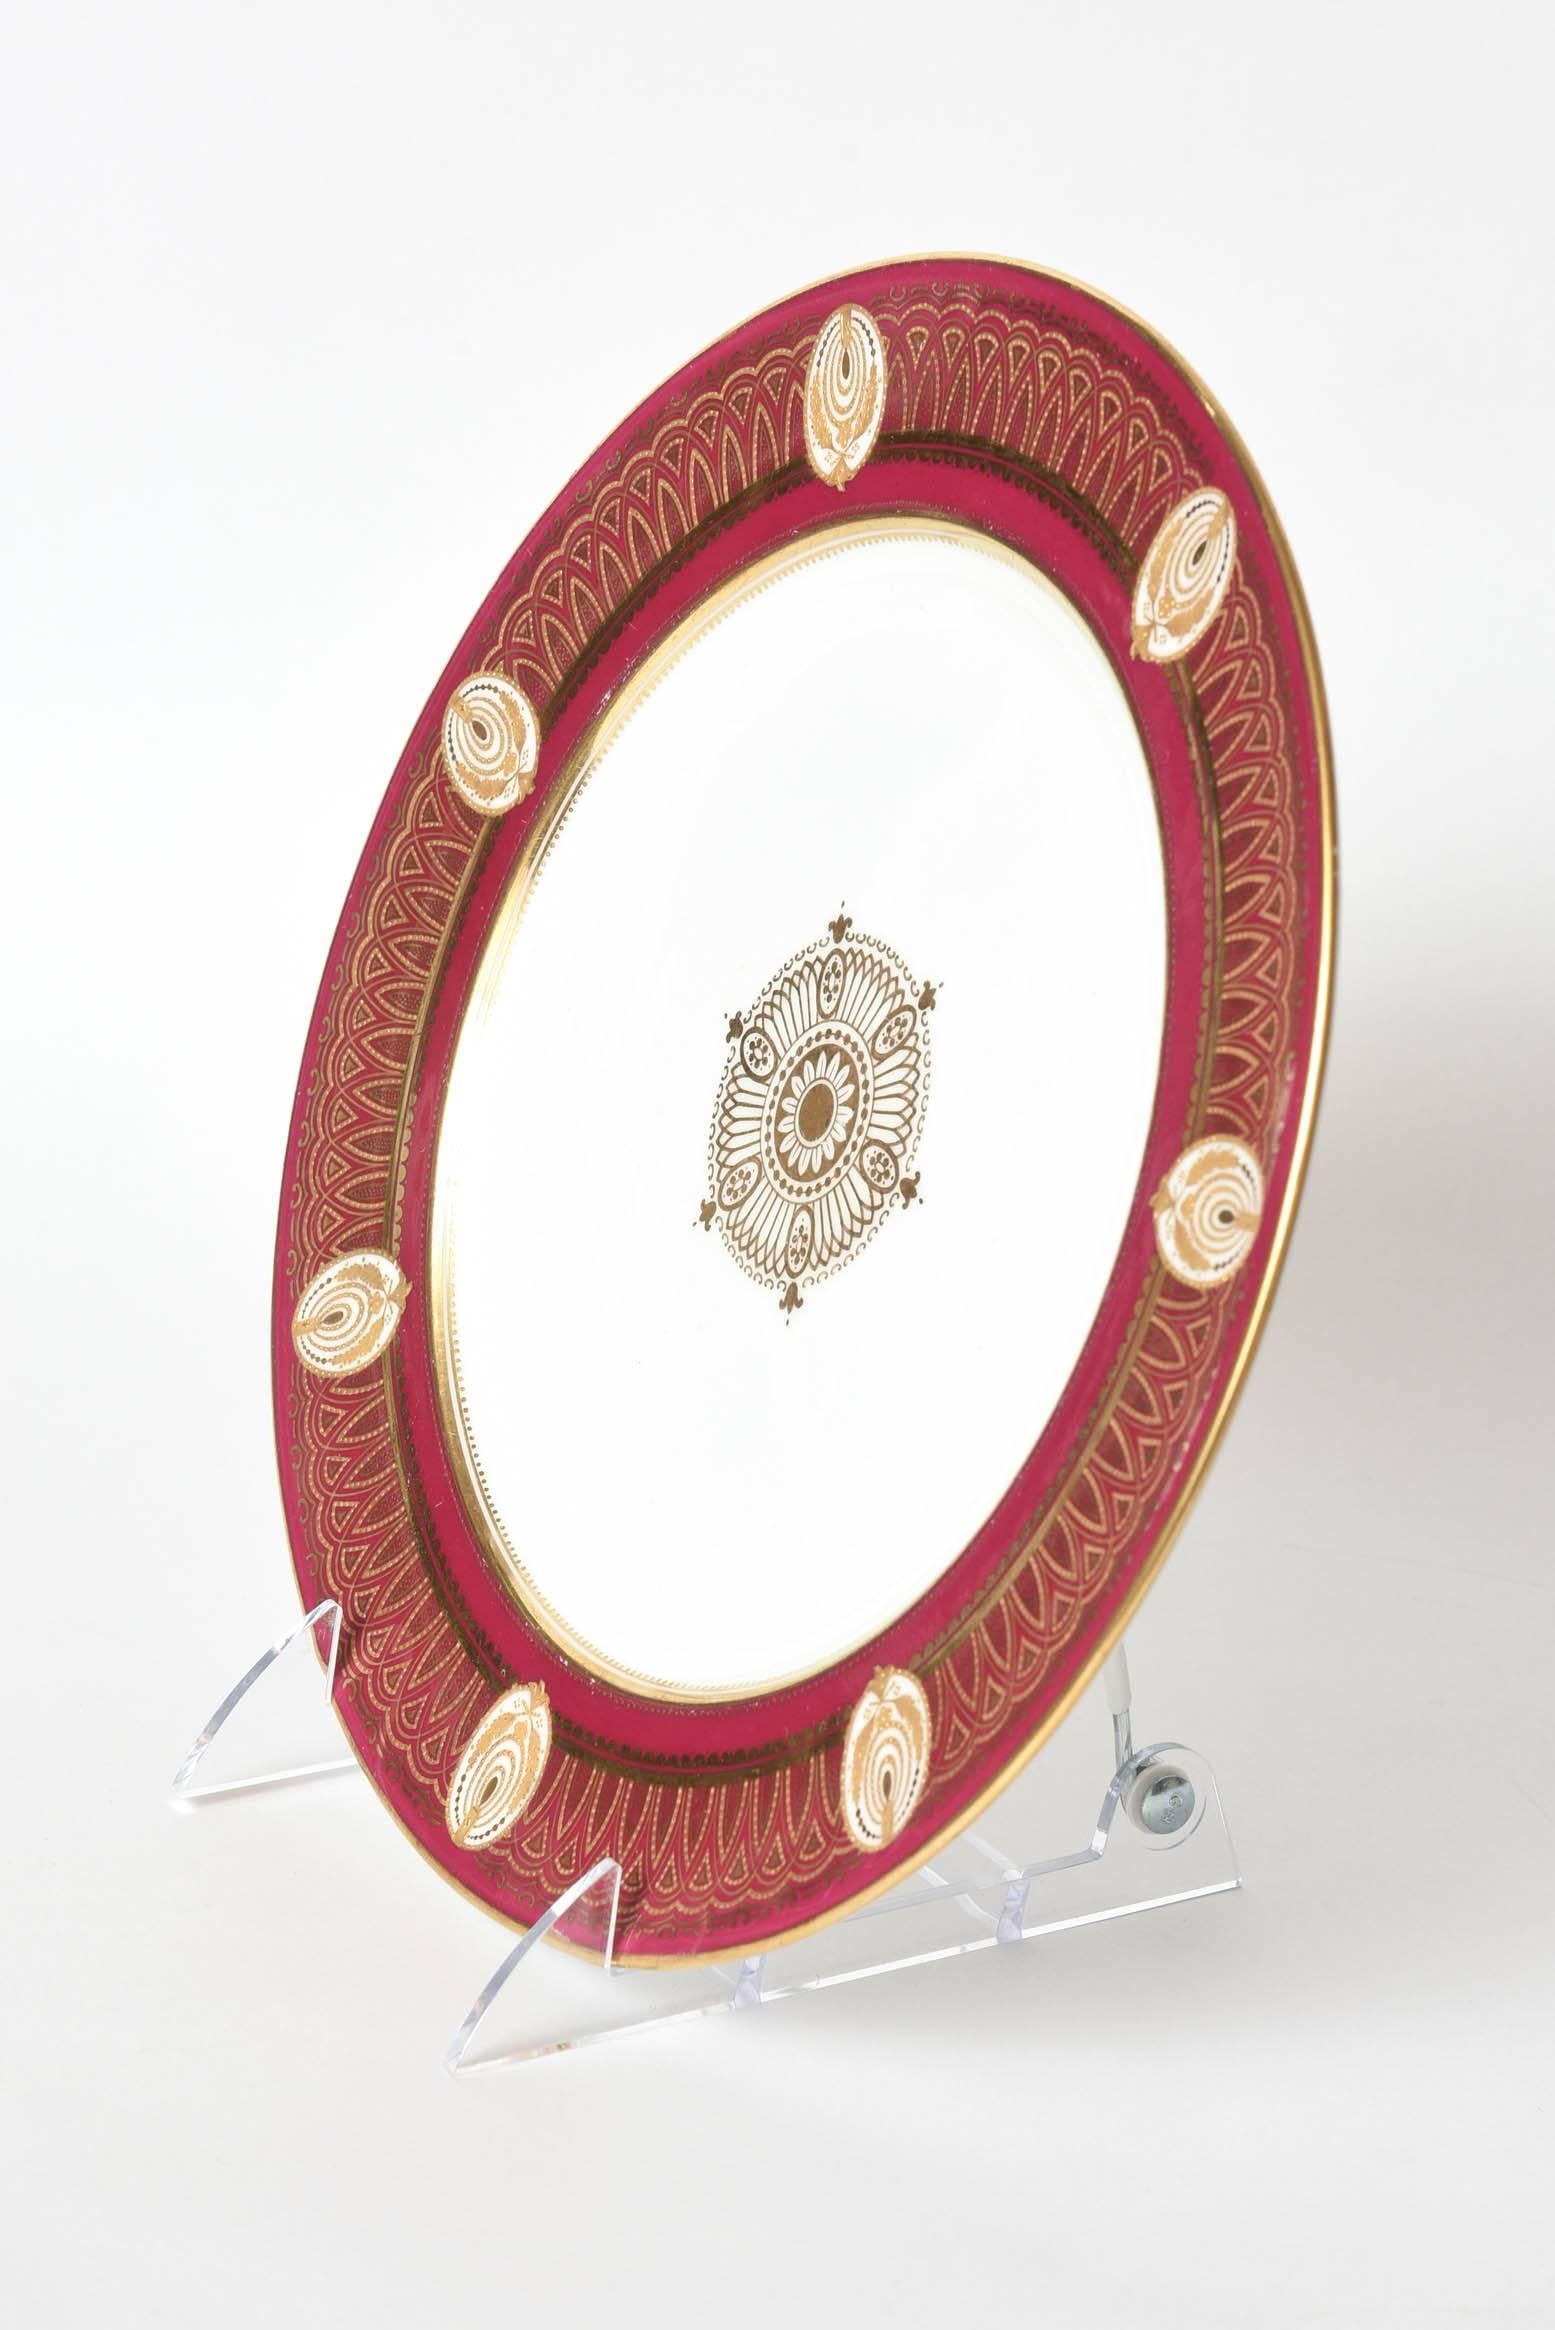 Late 19th Century Stunning Ruby Red & Gilt Dinner Plates, Gold Medallion Centers, Raised Detail.11